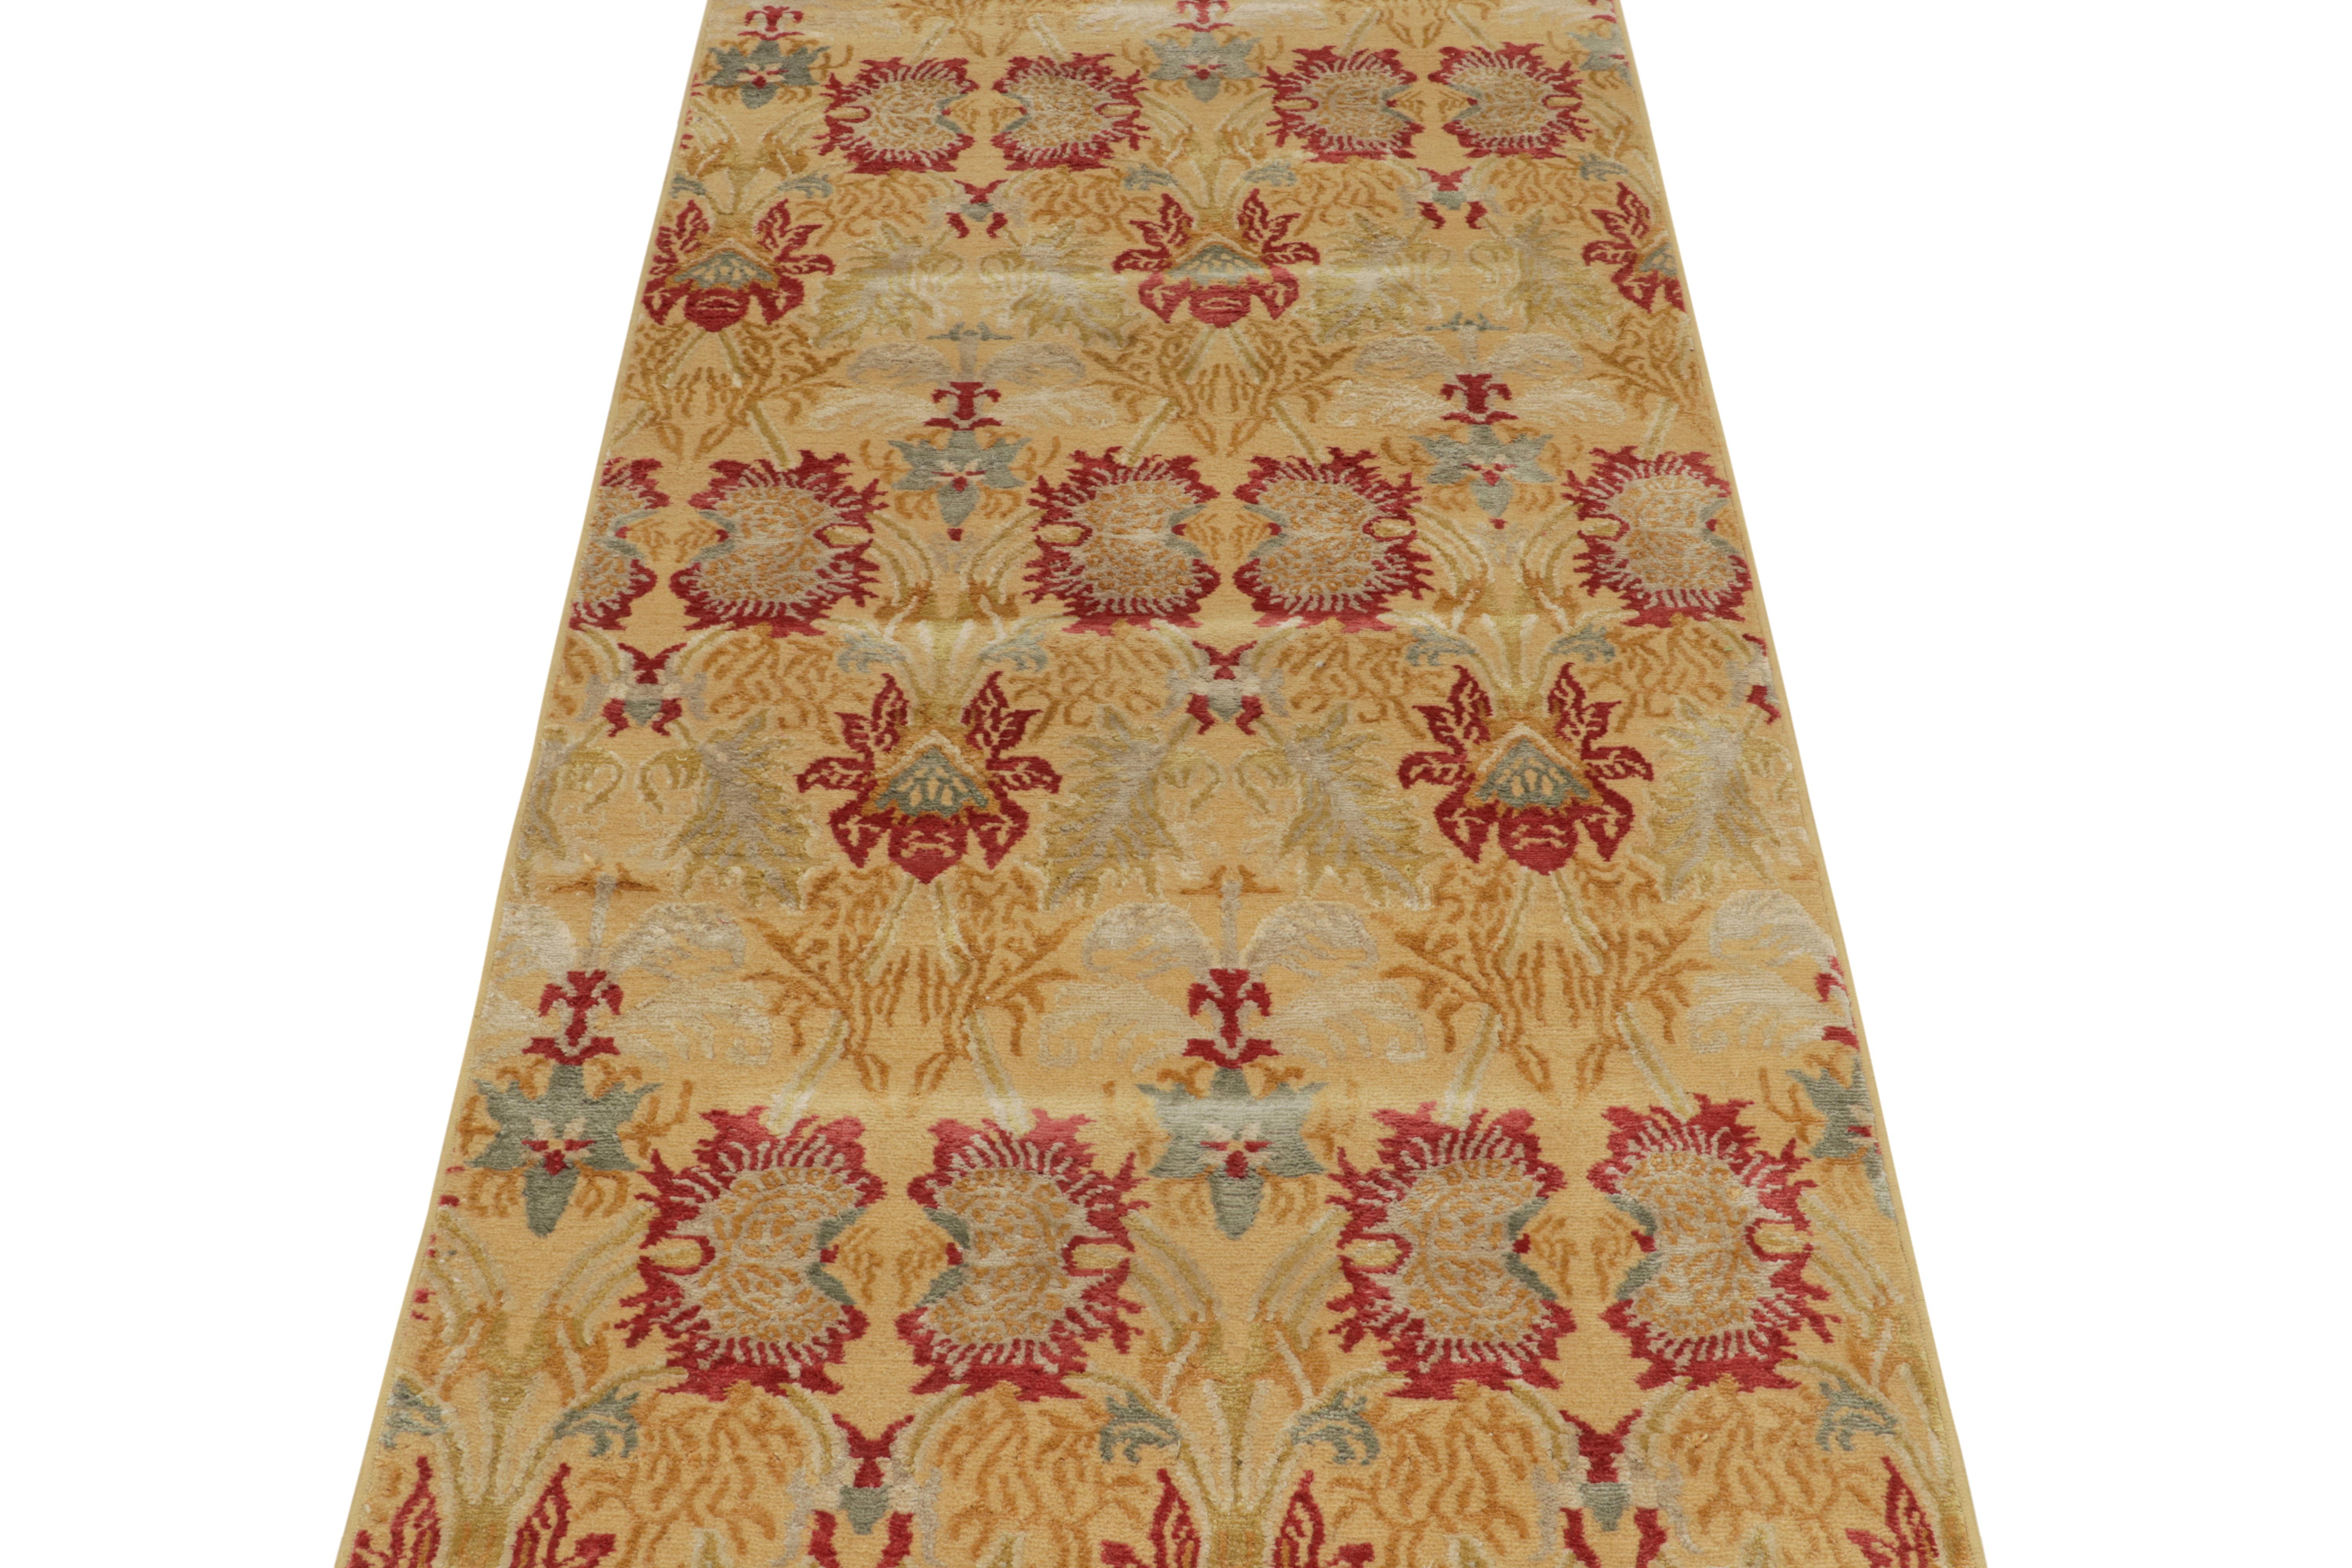 Nepalese Rug & Kilim's Spanish European Style Runner in Gold, Red & Gray Floral Pattern For Sale